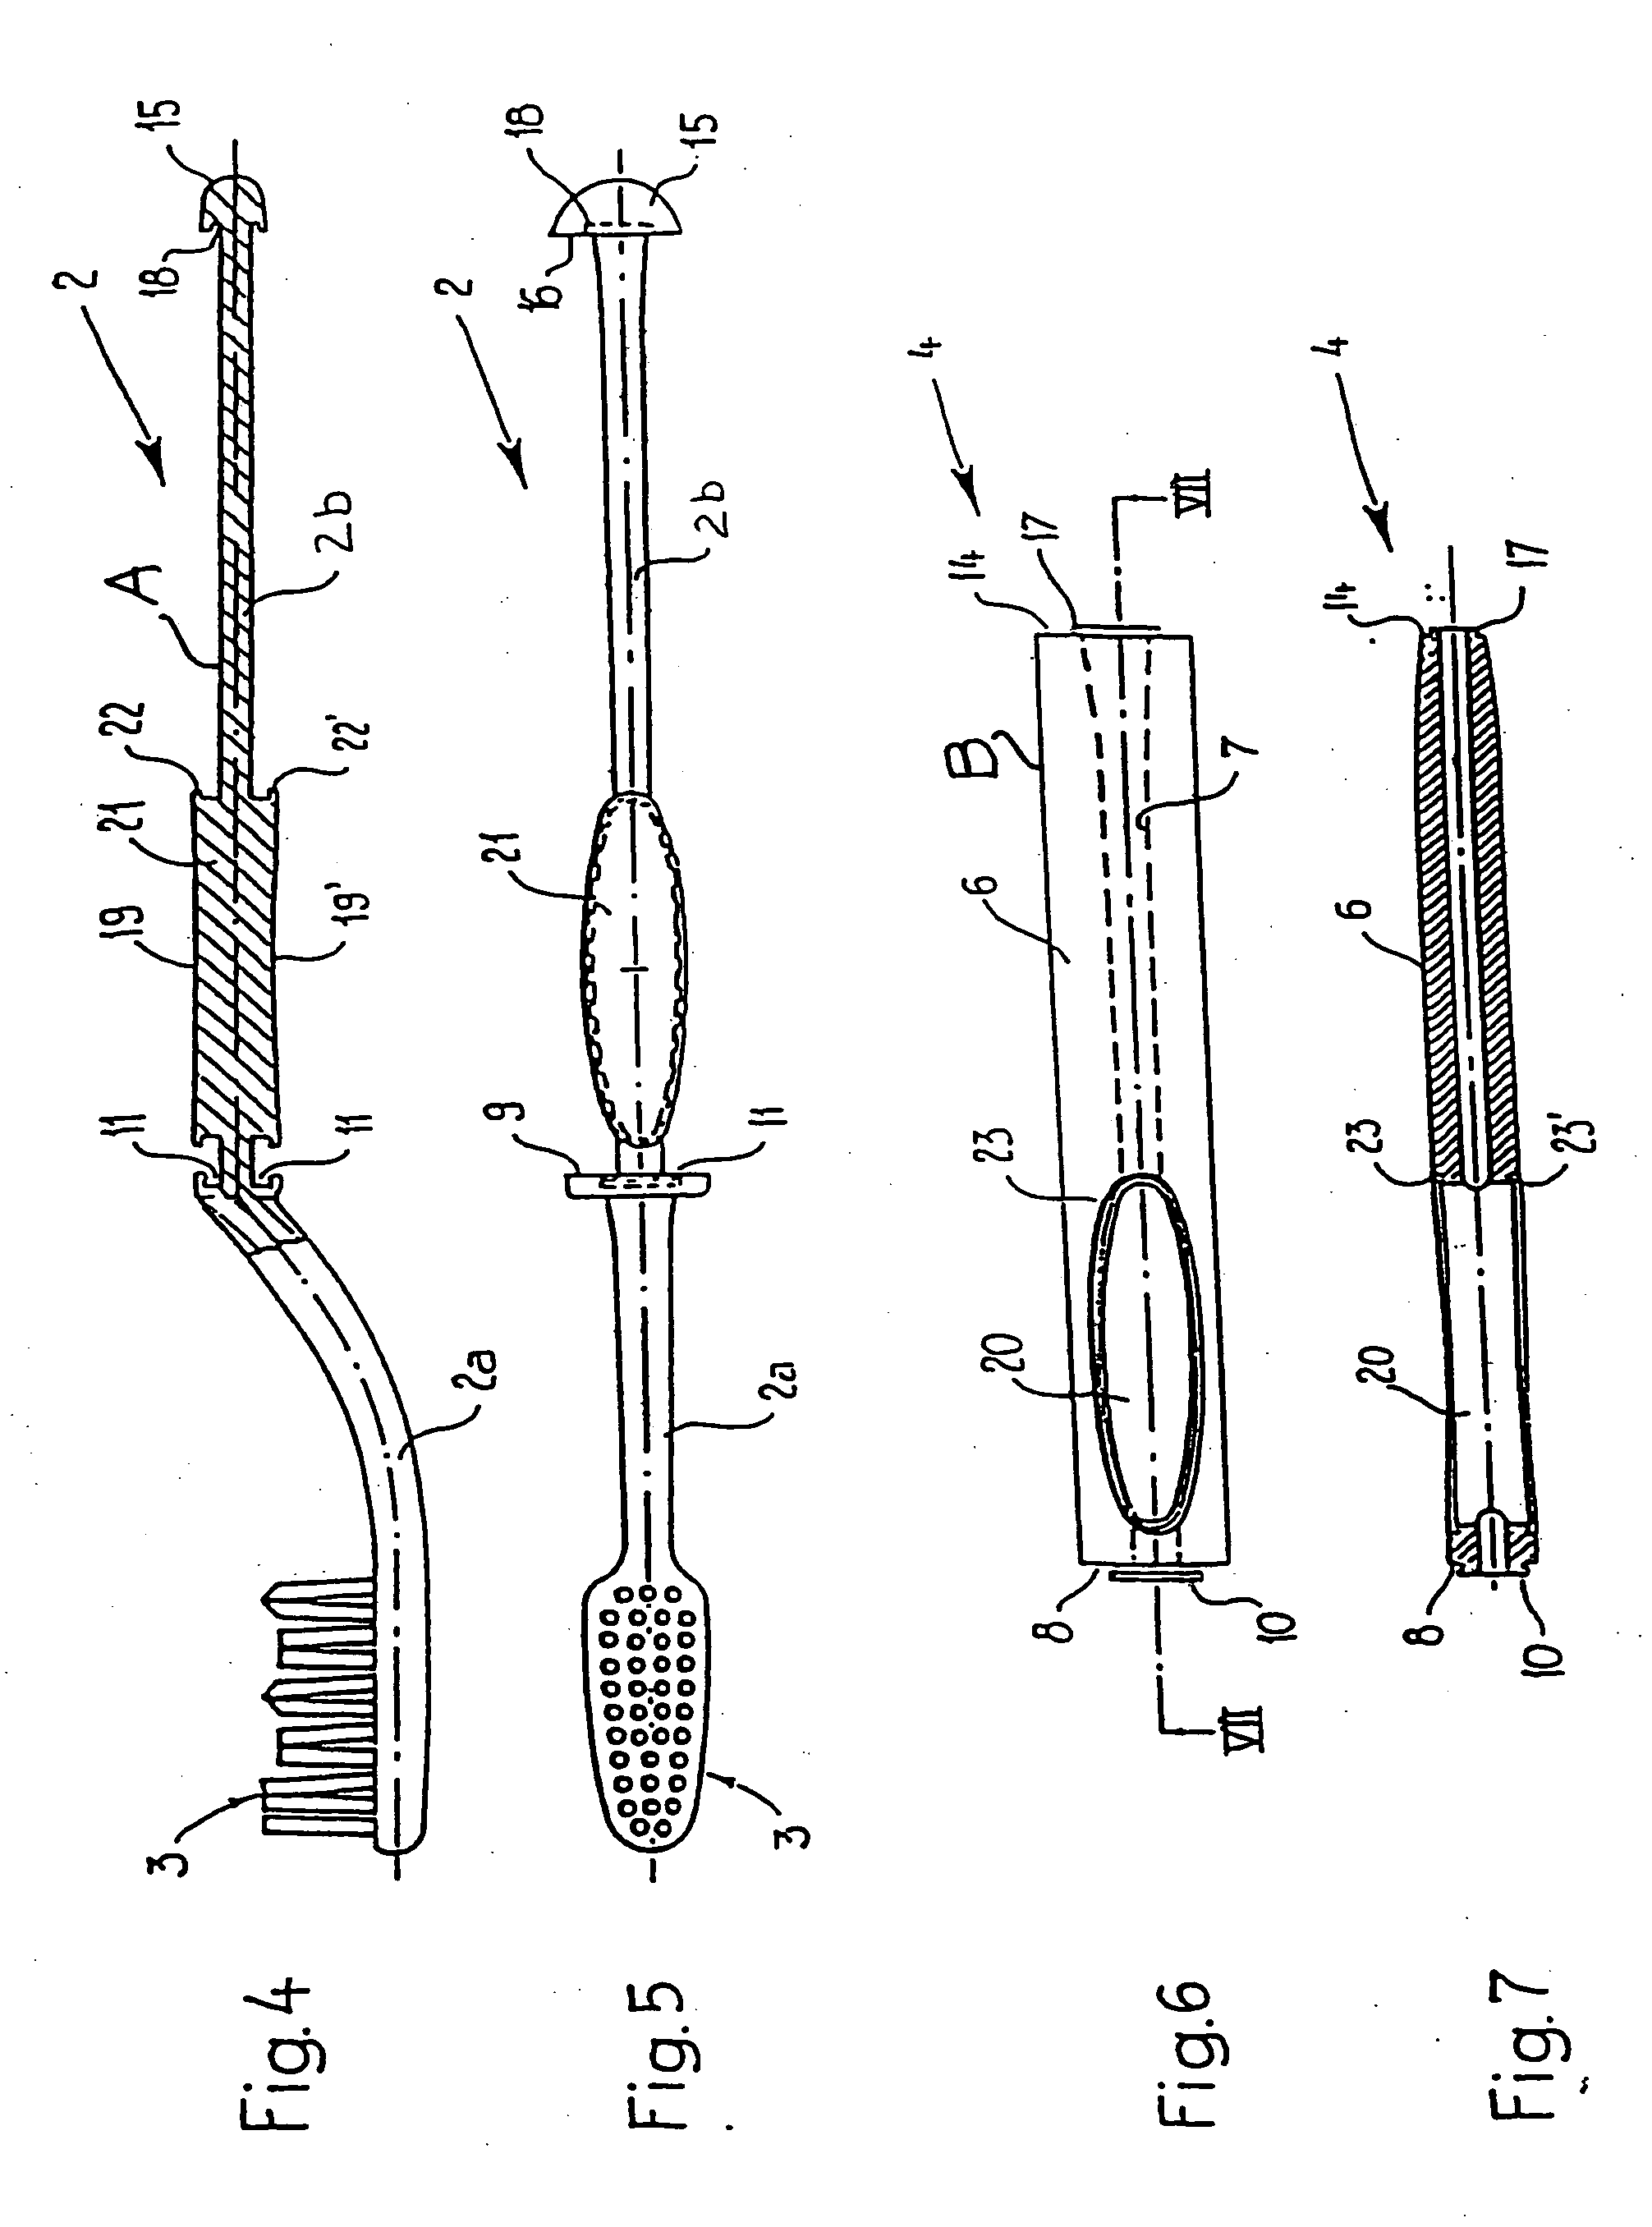 Plastic object for use in personal hygiene